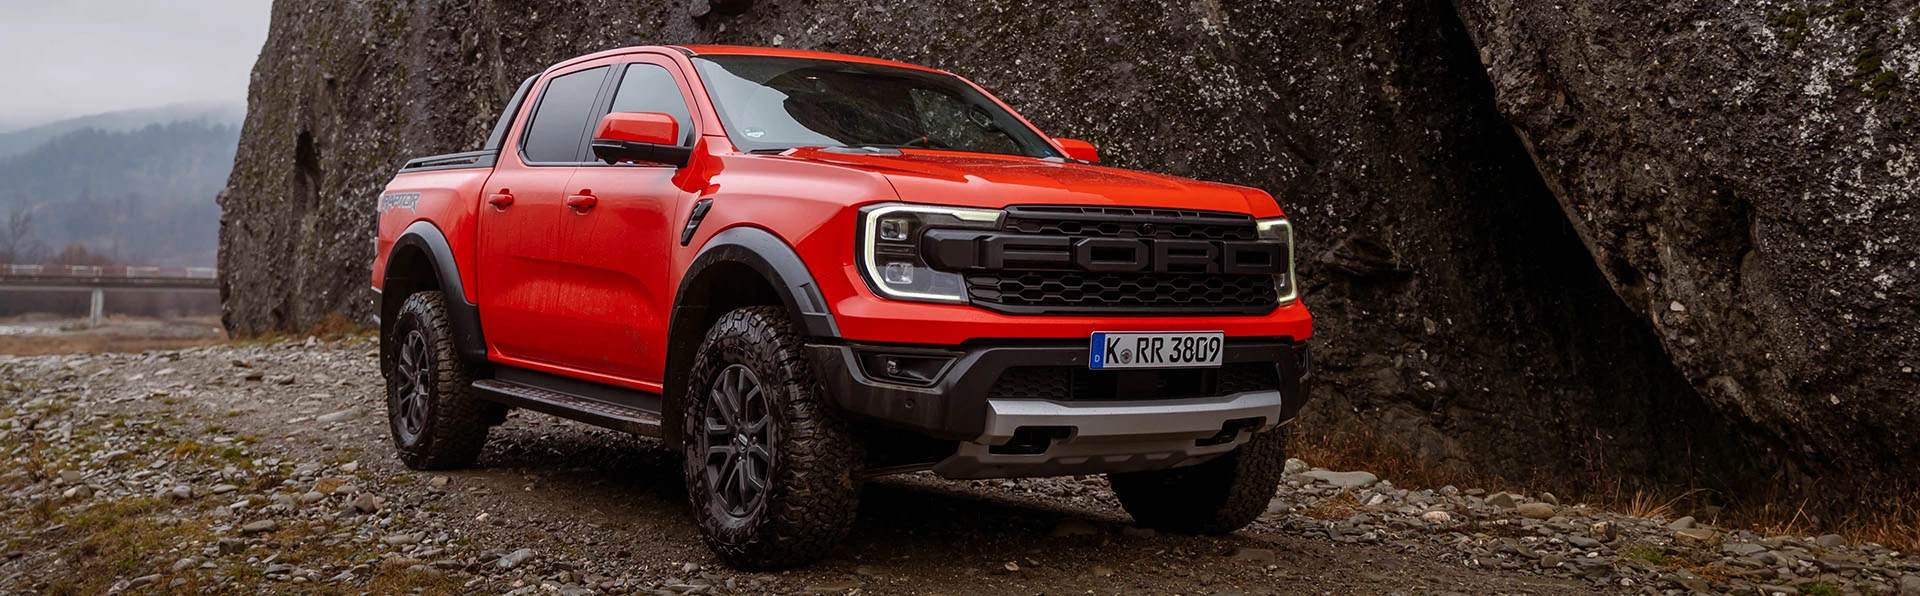 New Models Coming in 2023: Ford Ranger